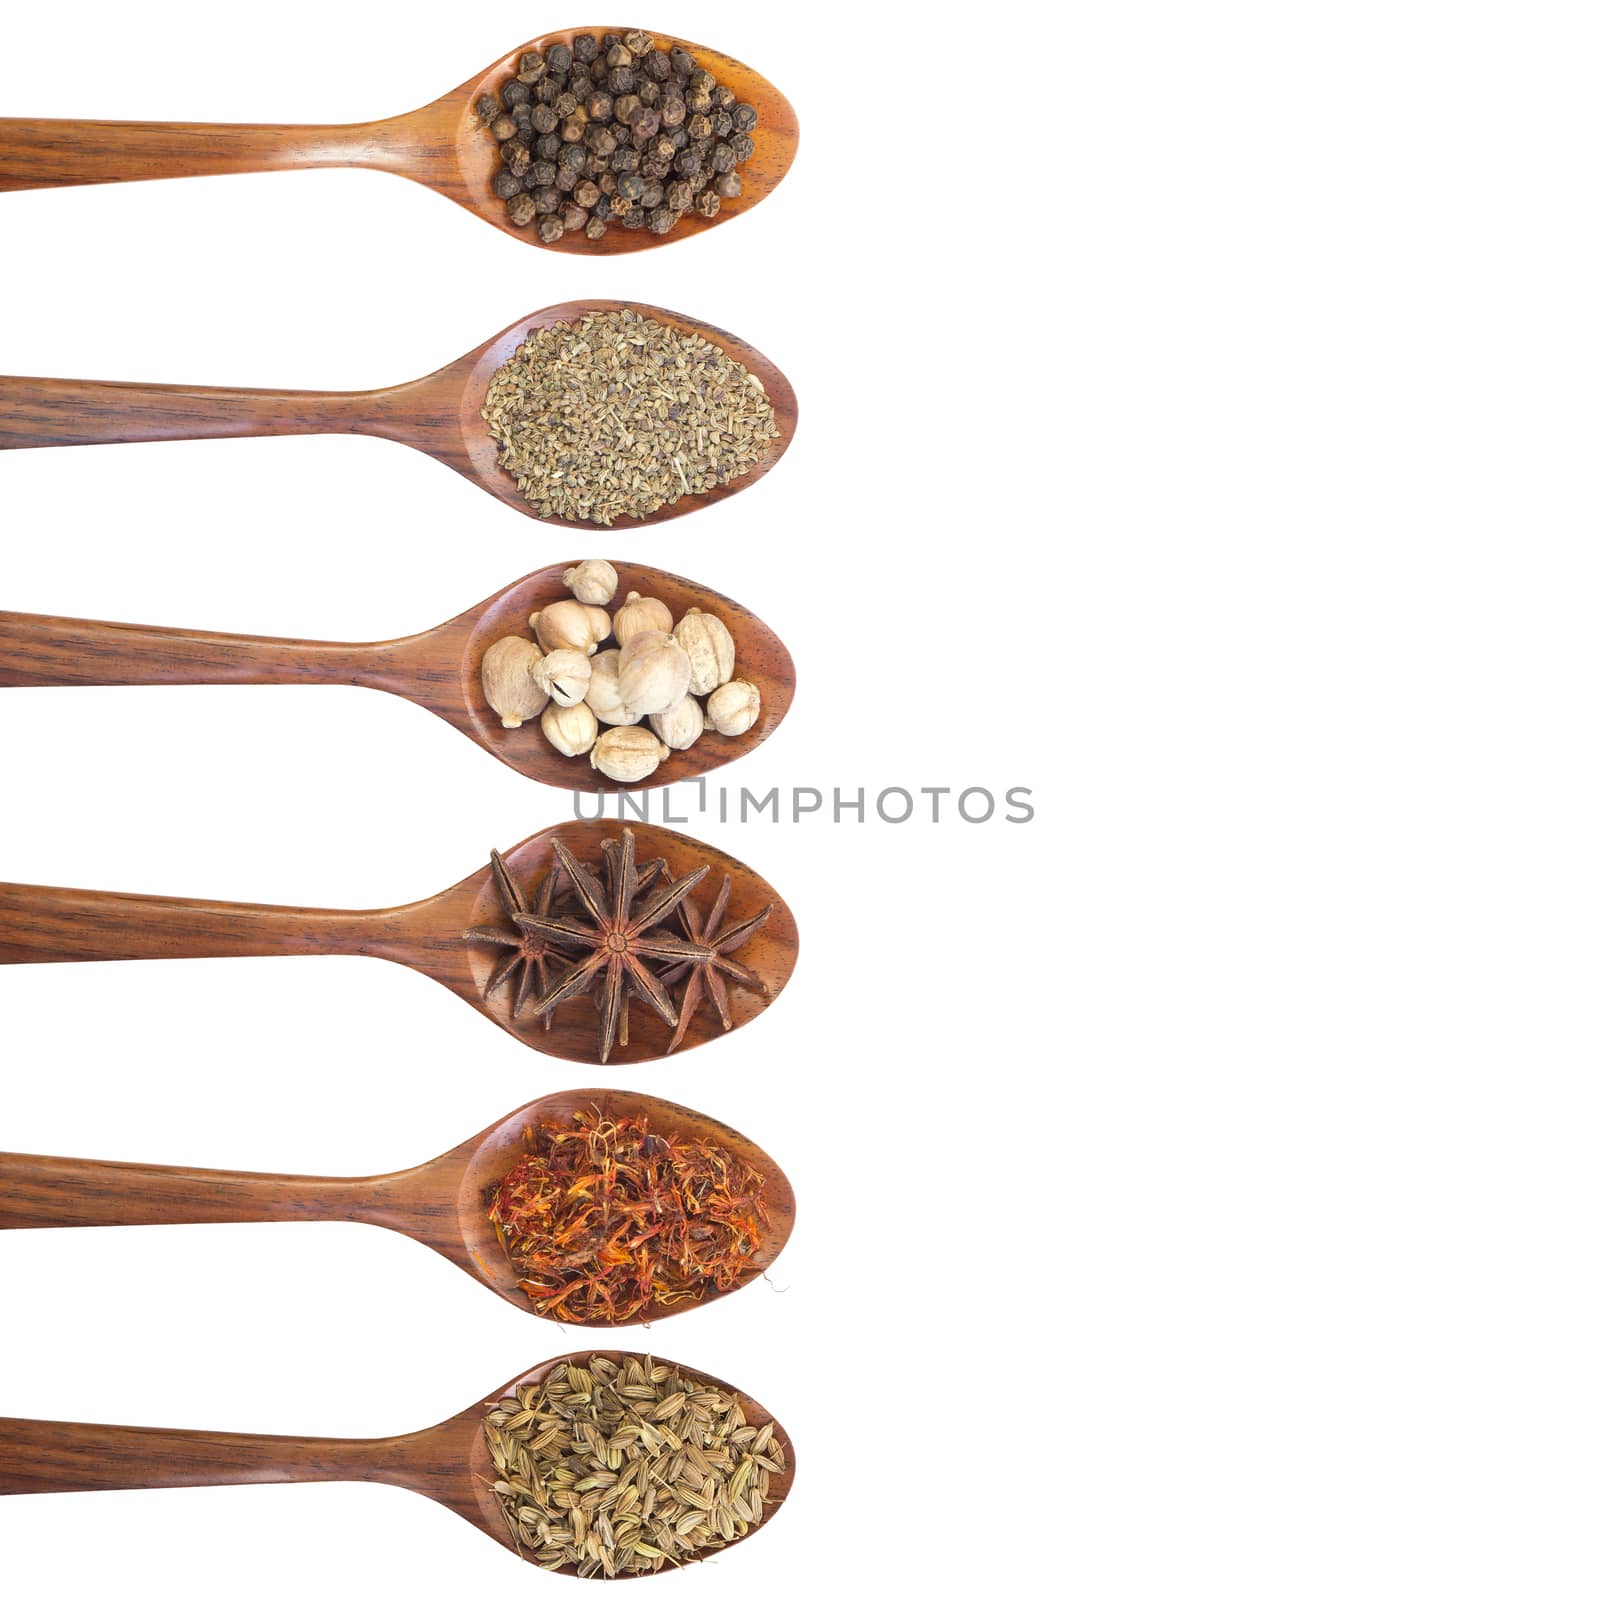 Collection of 6 spices on a wooden spoon by wyoosumran